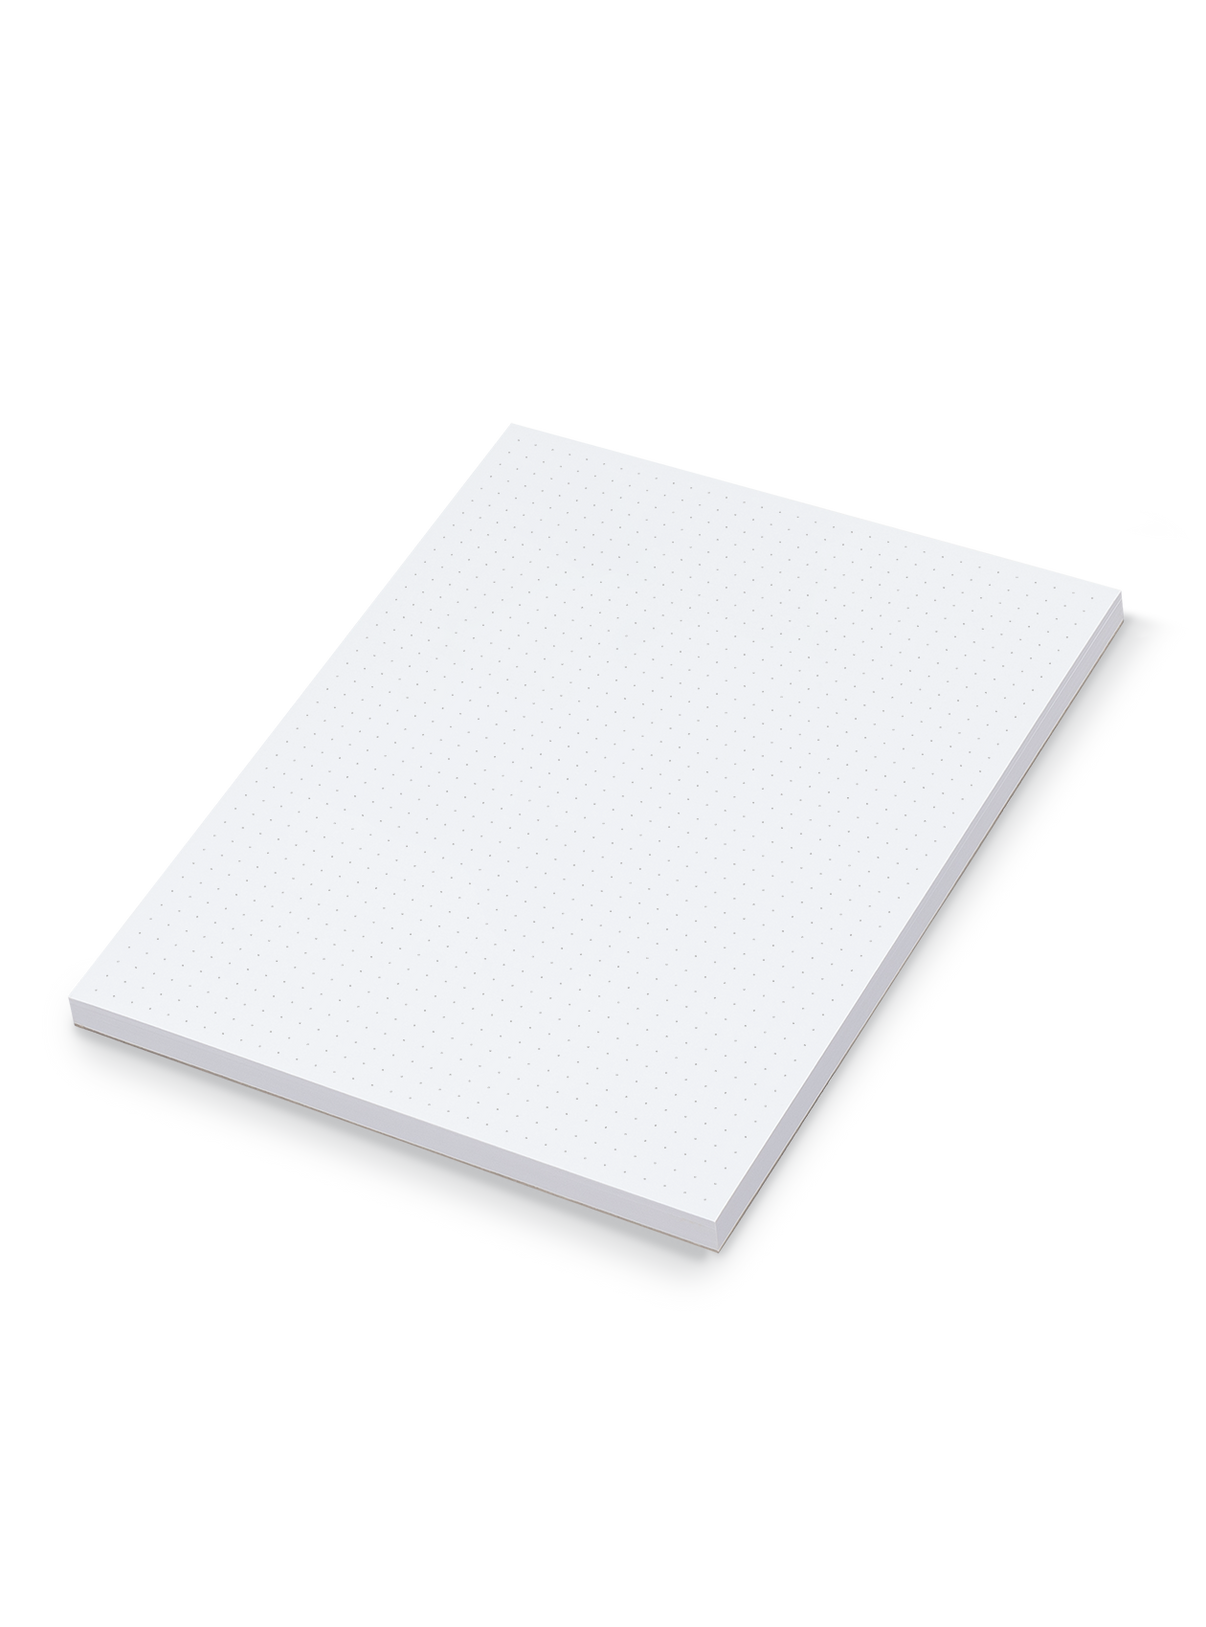 The Appointed Dot Grid Pad with white paper and cool gray dot grid pattern and tear-off sheets, siide angle view.